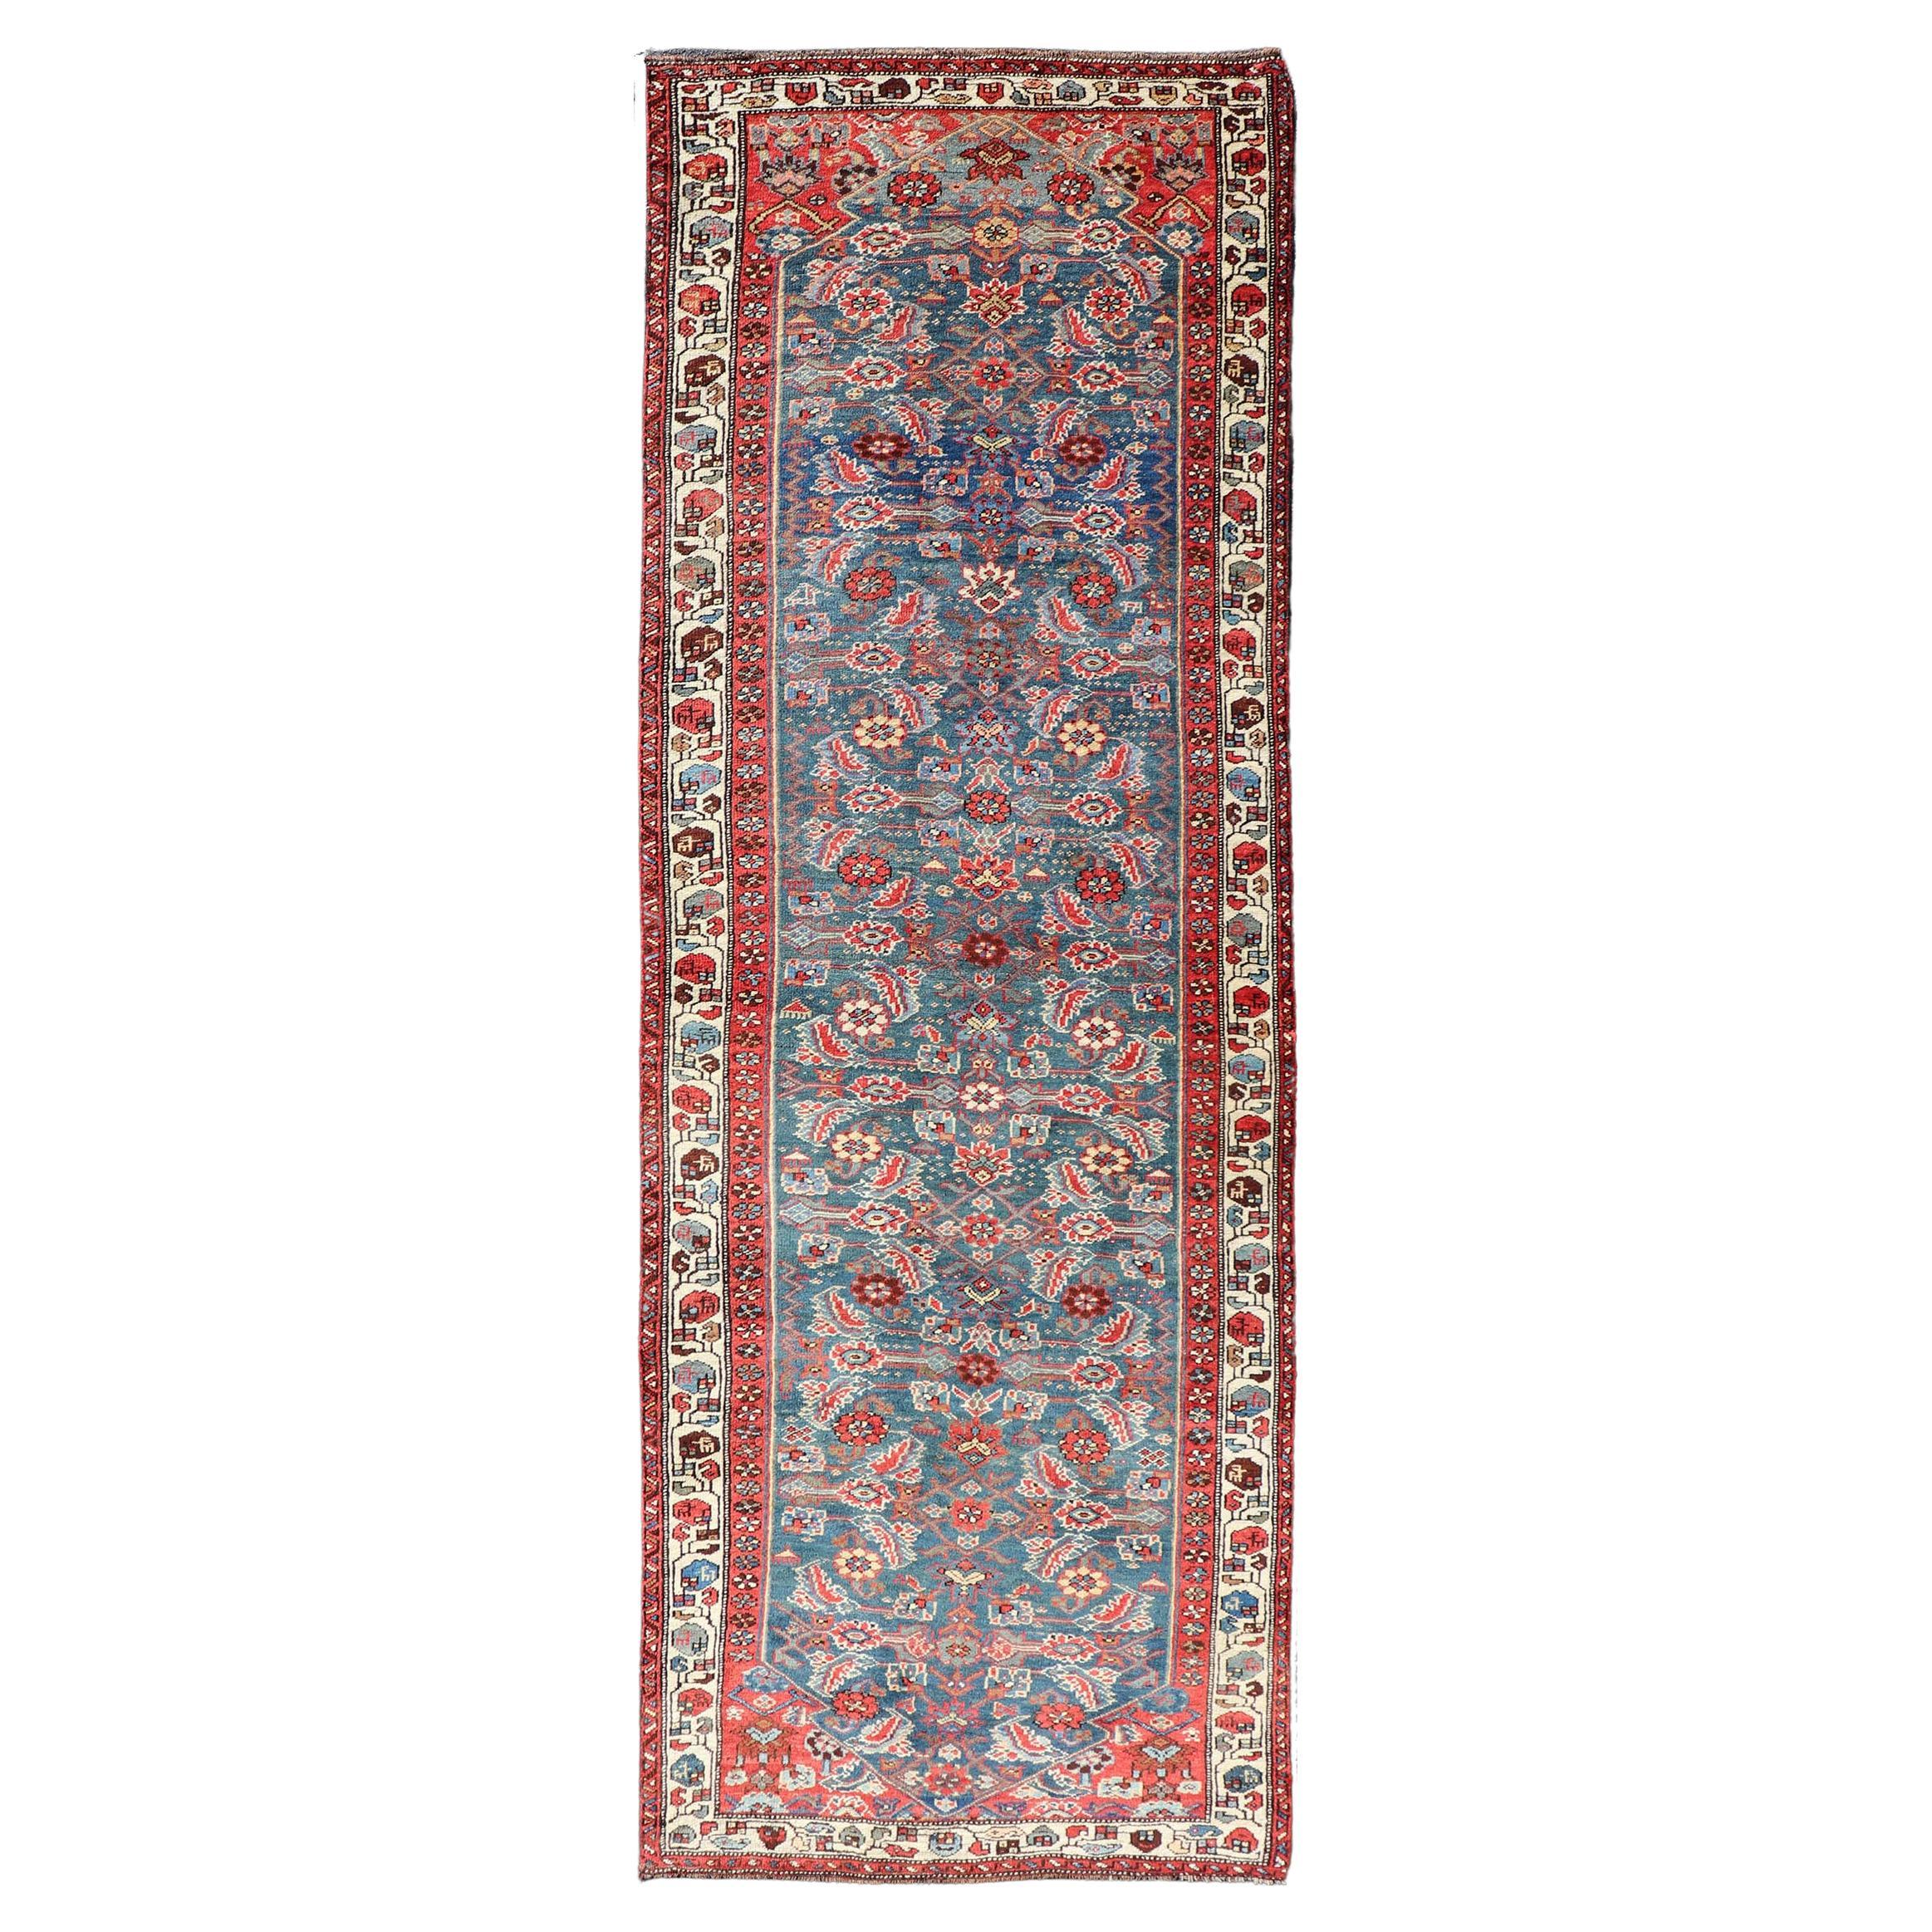 Antique Persian Bidjar Rug with Large Floral Motifs in Blue, Red, and Ivory For Sale